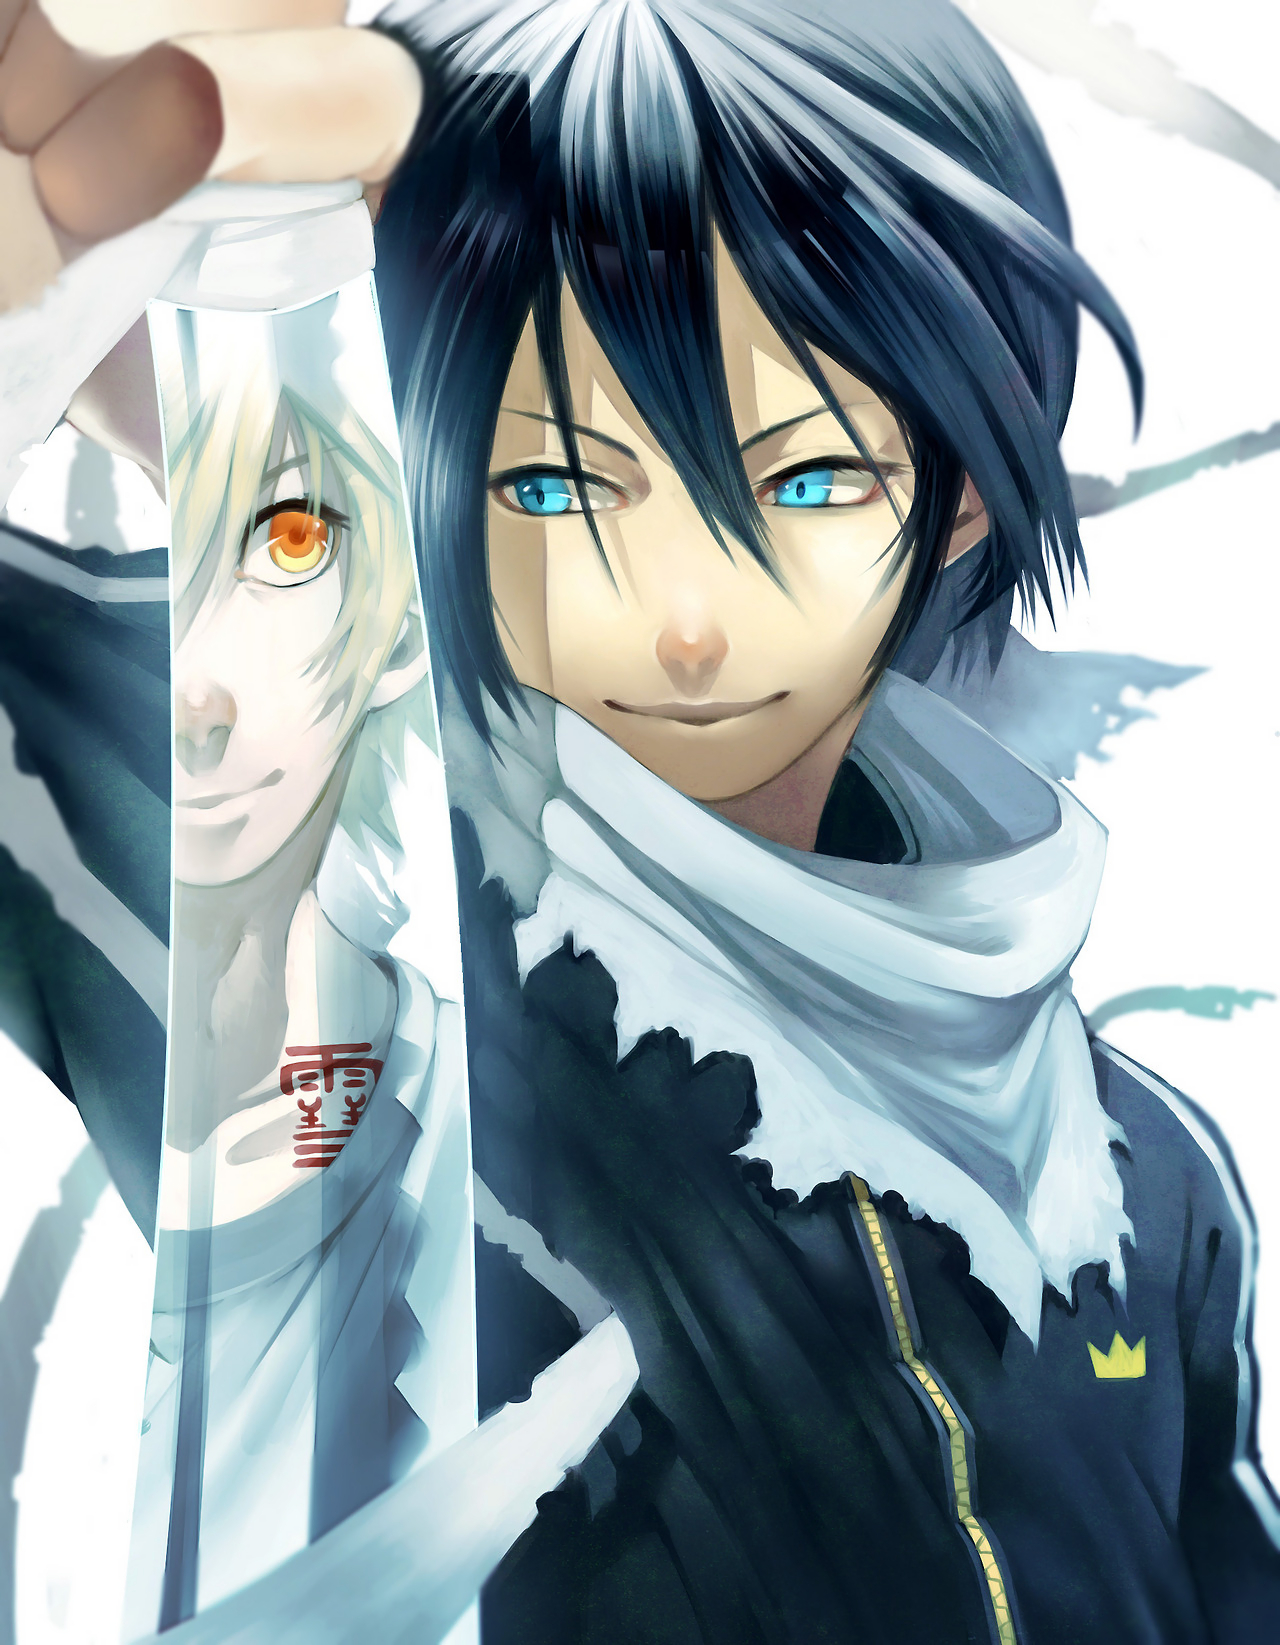 Noragami Picture - Image Abyss